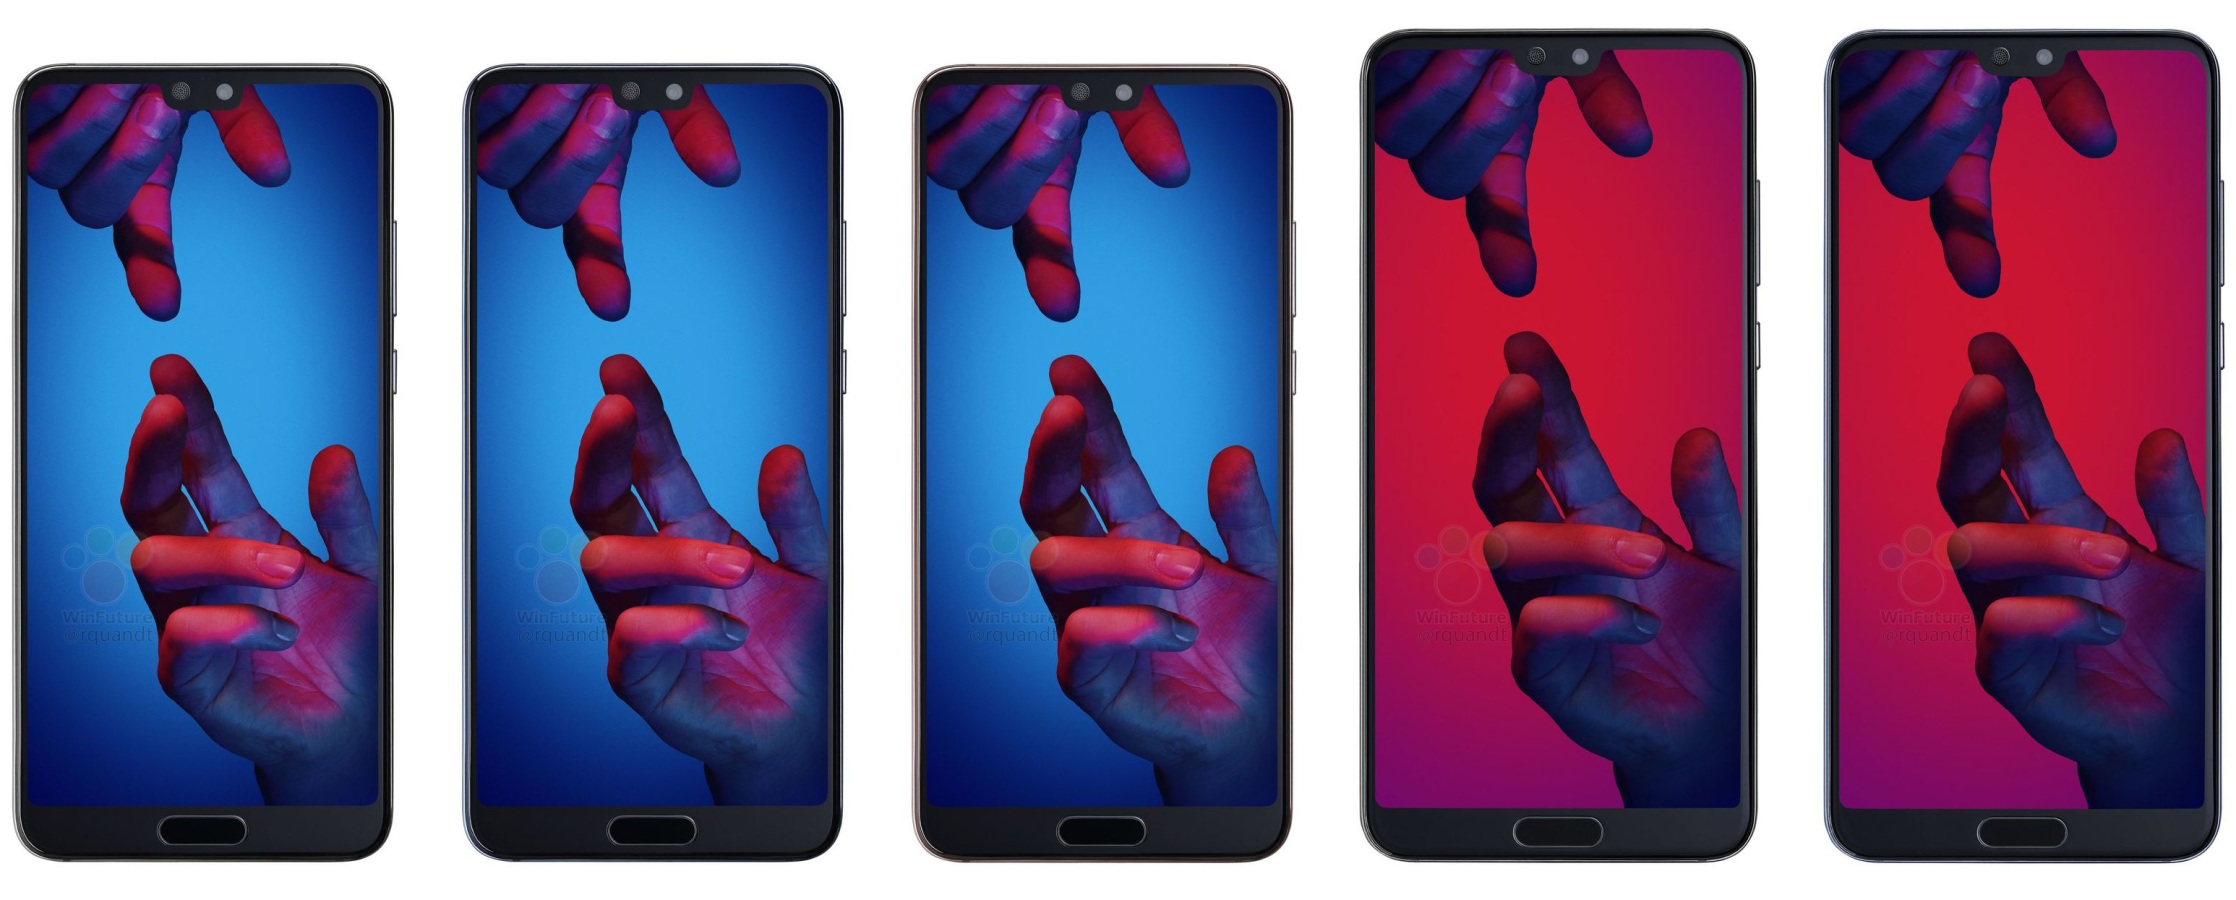 Huawei P20 to cost €679, P20 Pro to be €899 in Europe, latest leak reveals